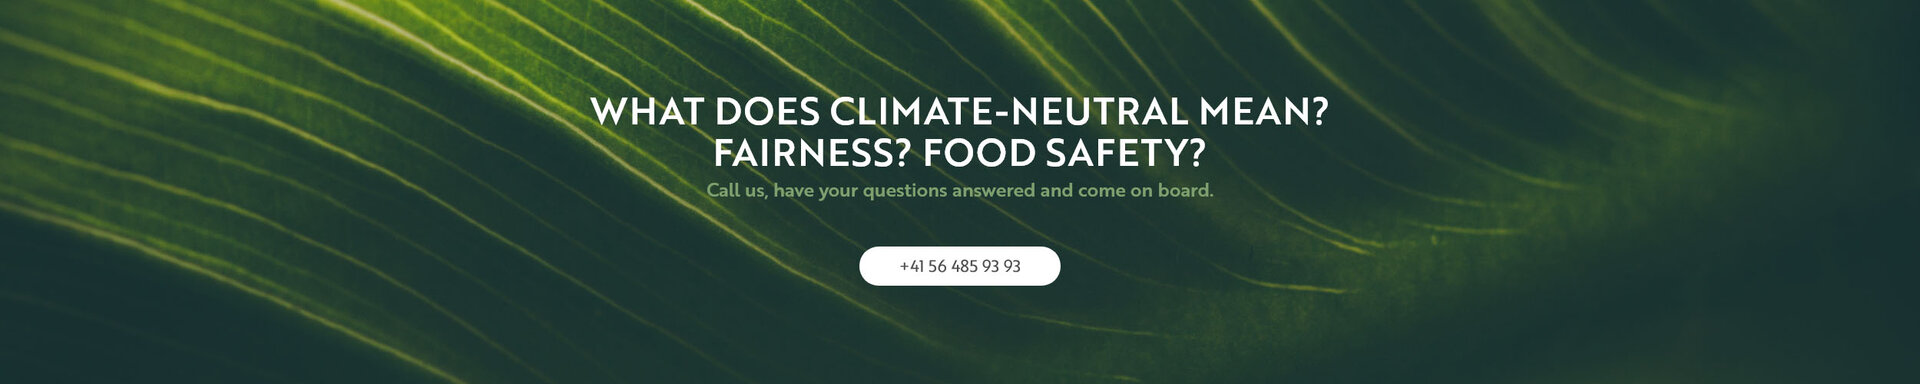 What does climate-neutral mean? Fairness? Food Safety?